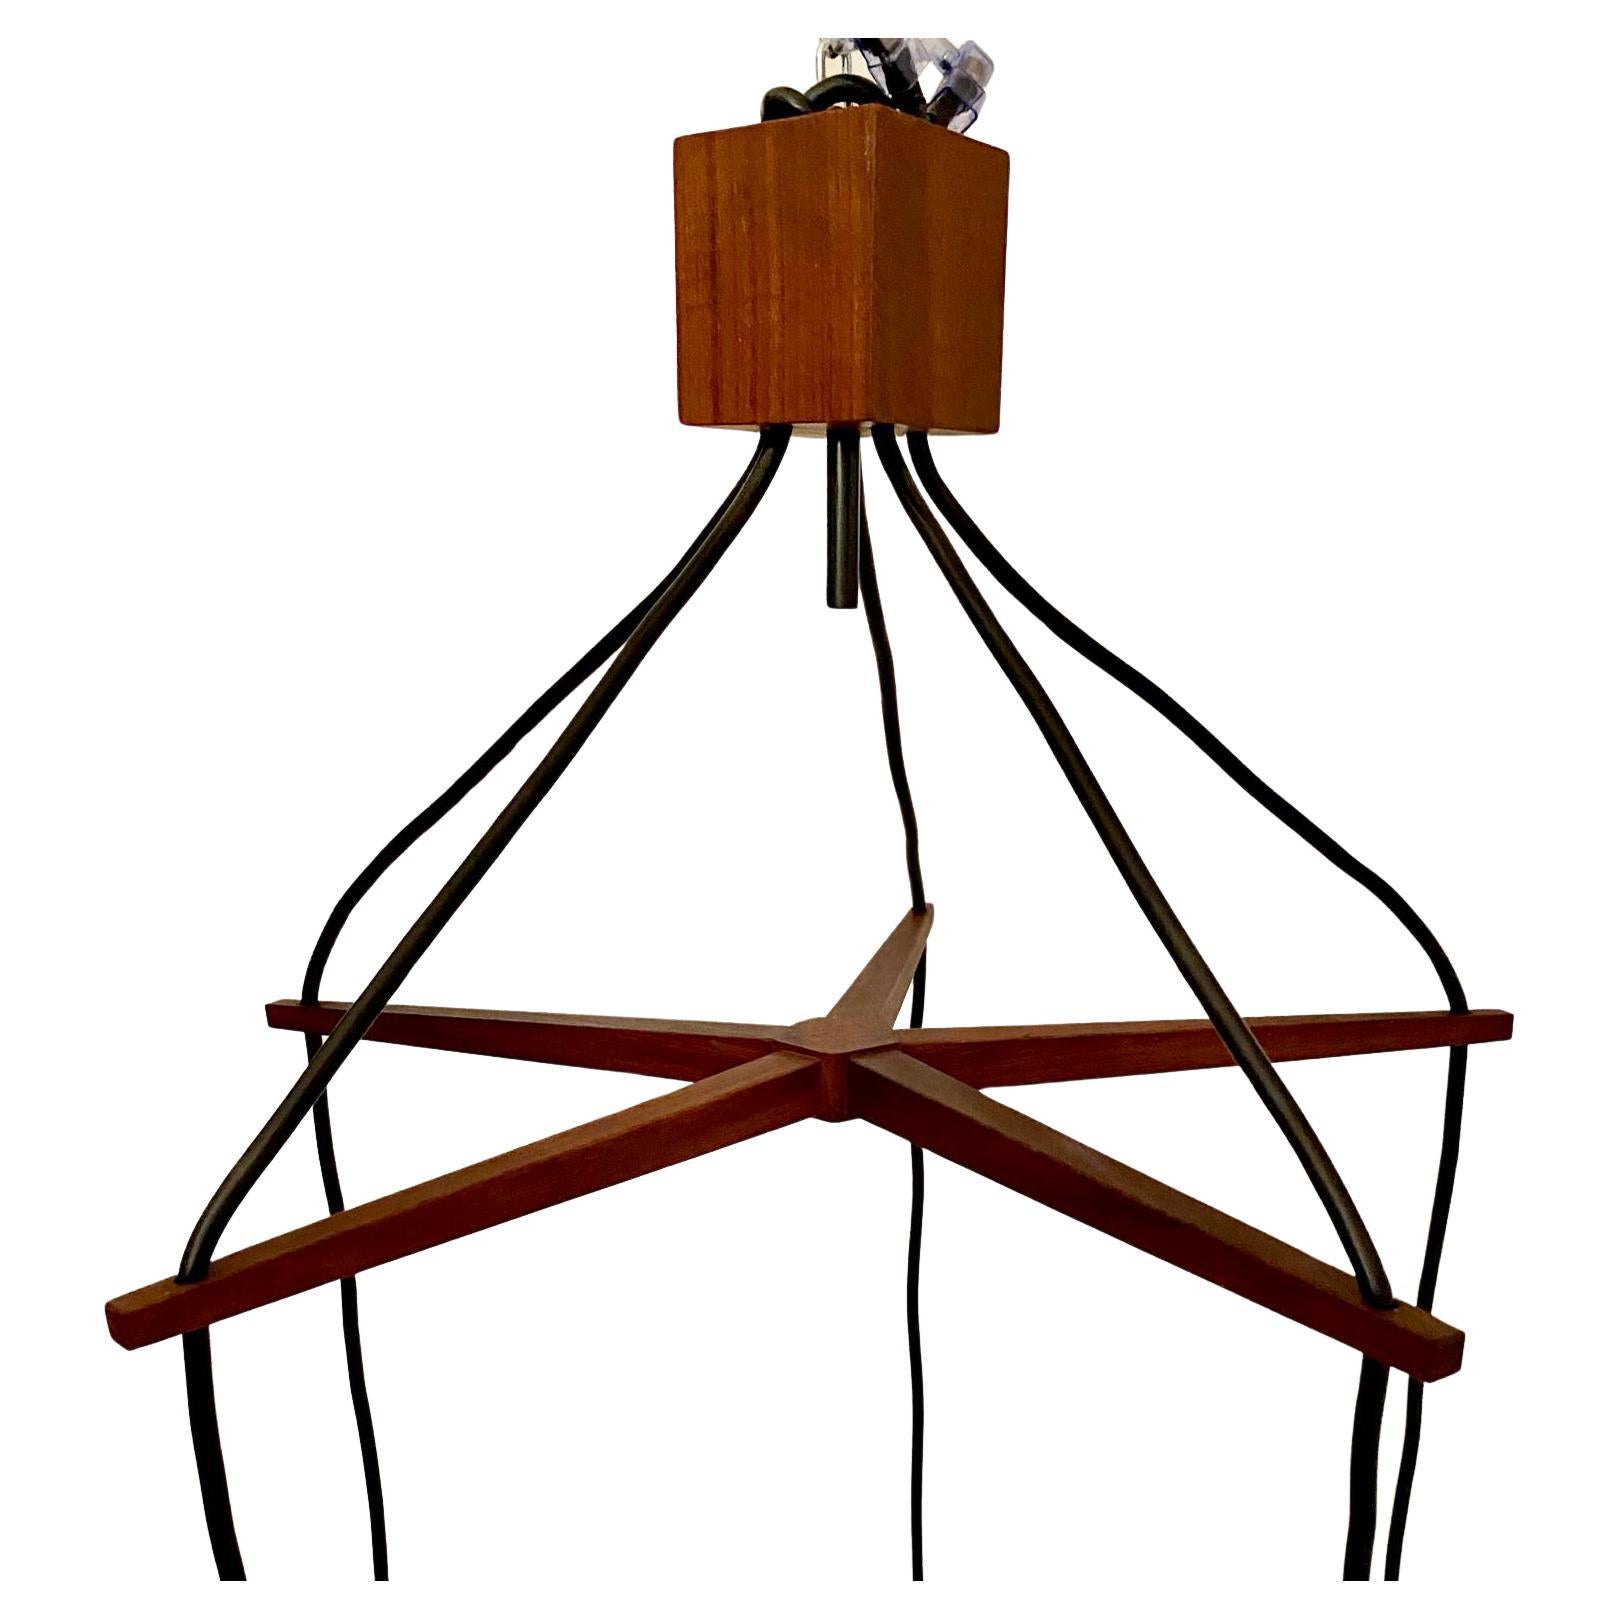 Vintage Wood Hanging Chandelier, Guzzini Italy, 1960 's For Sale 4